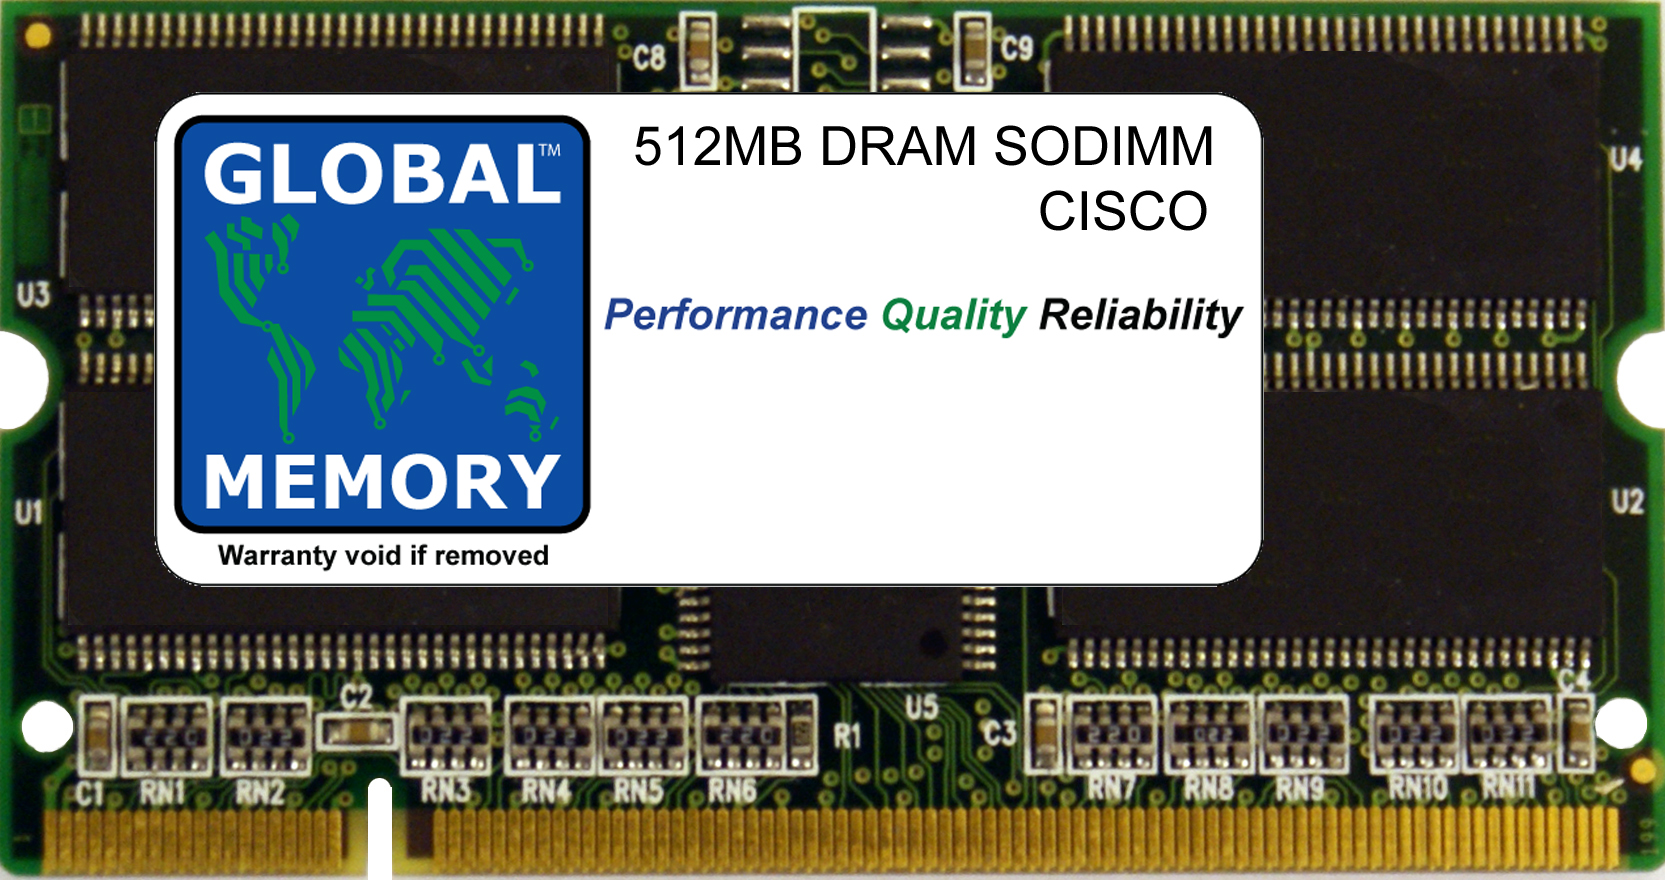 512MB DRAM SODIMM RAM FOR CISCO CATALYST 6500 SERIES SWITCHES & 7600 SERIES ROUTERS FlexWAN MODULE (MEM-CC-WAN-512M) - Click Image to Close